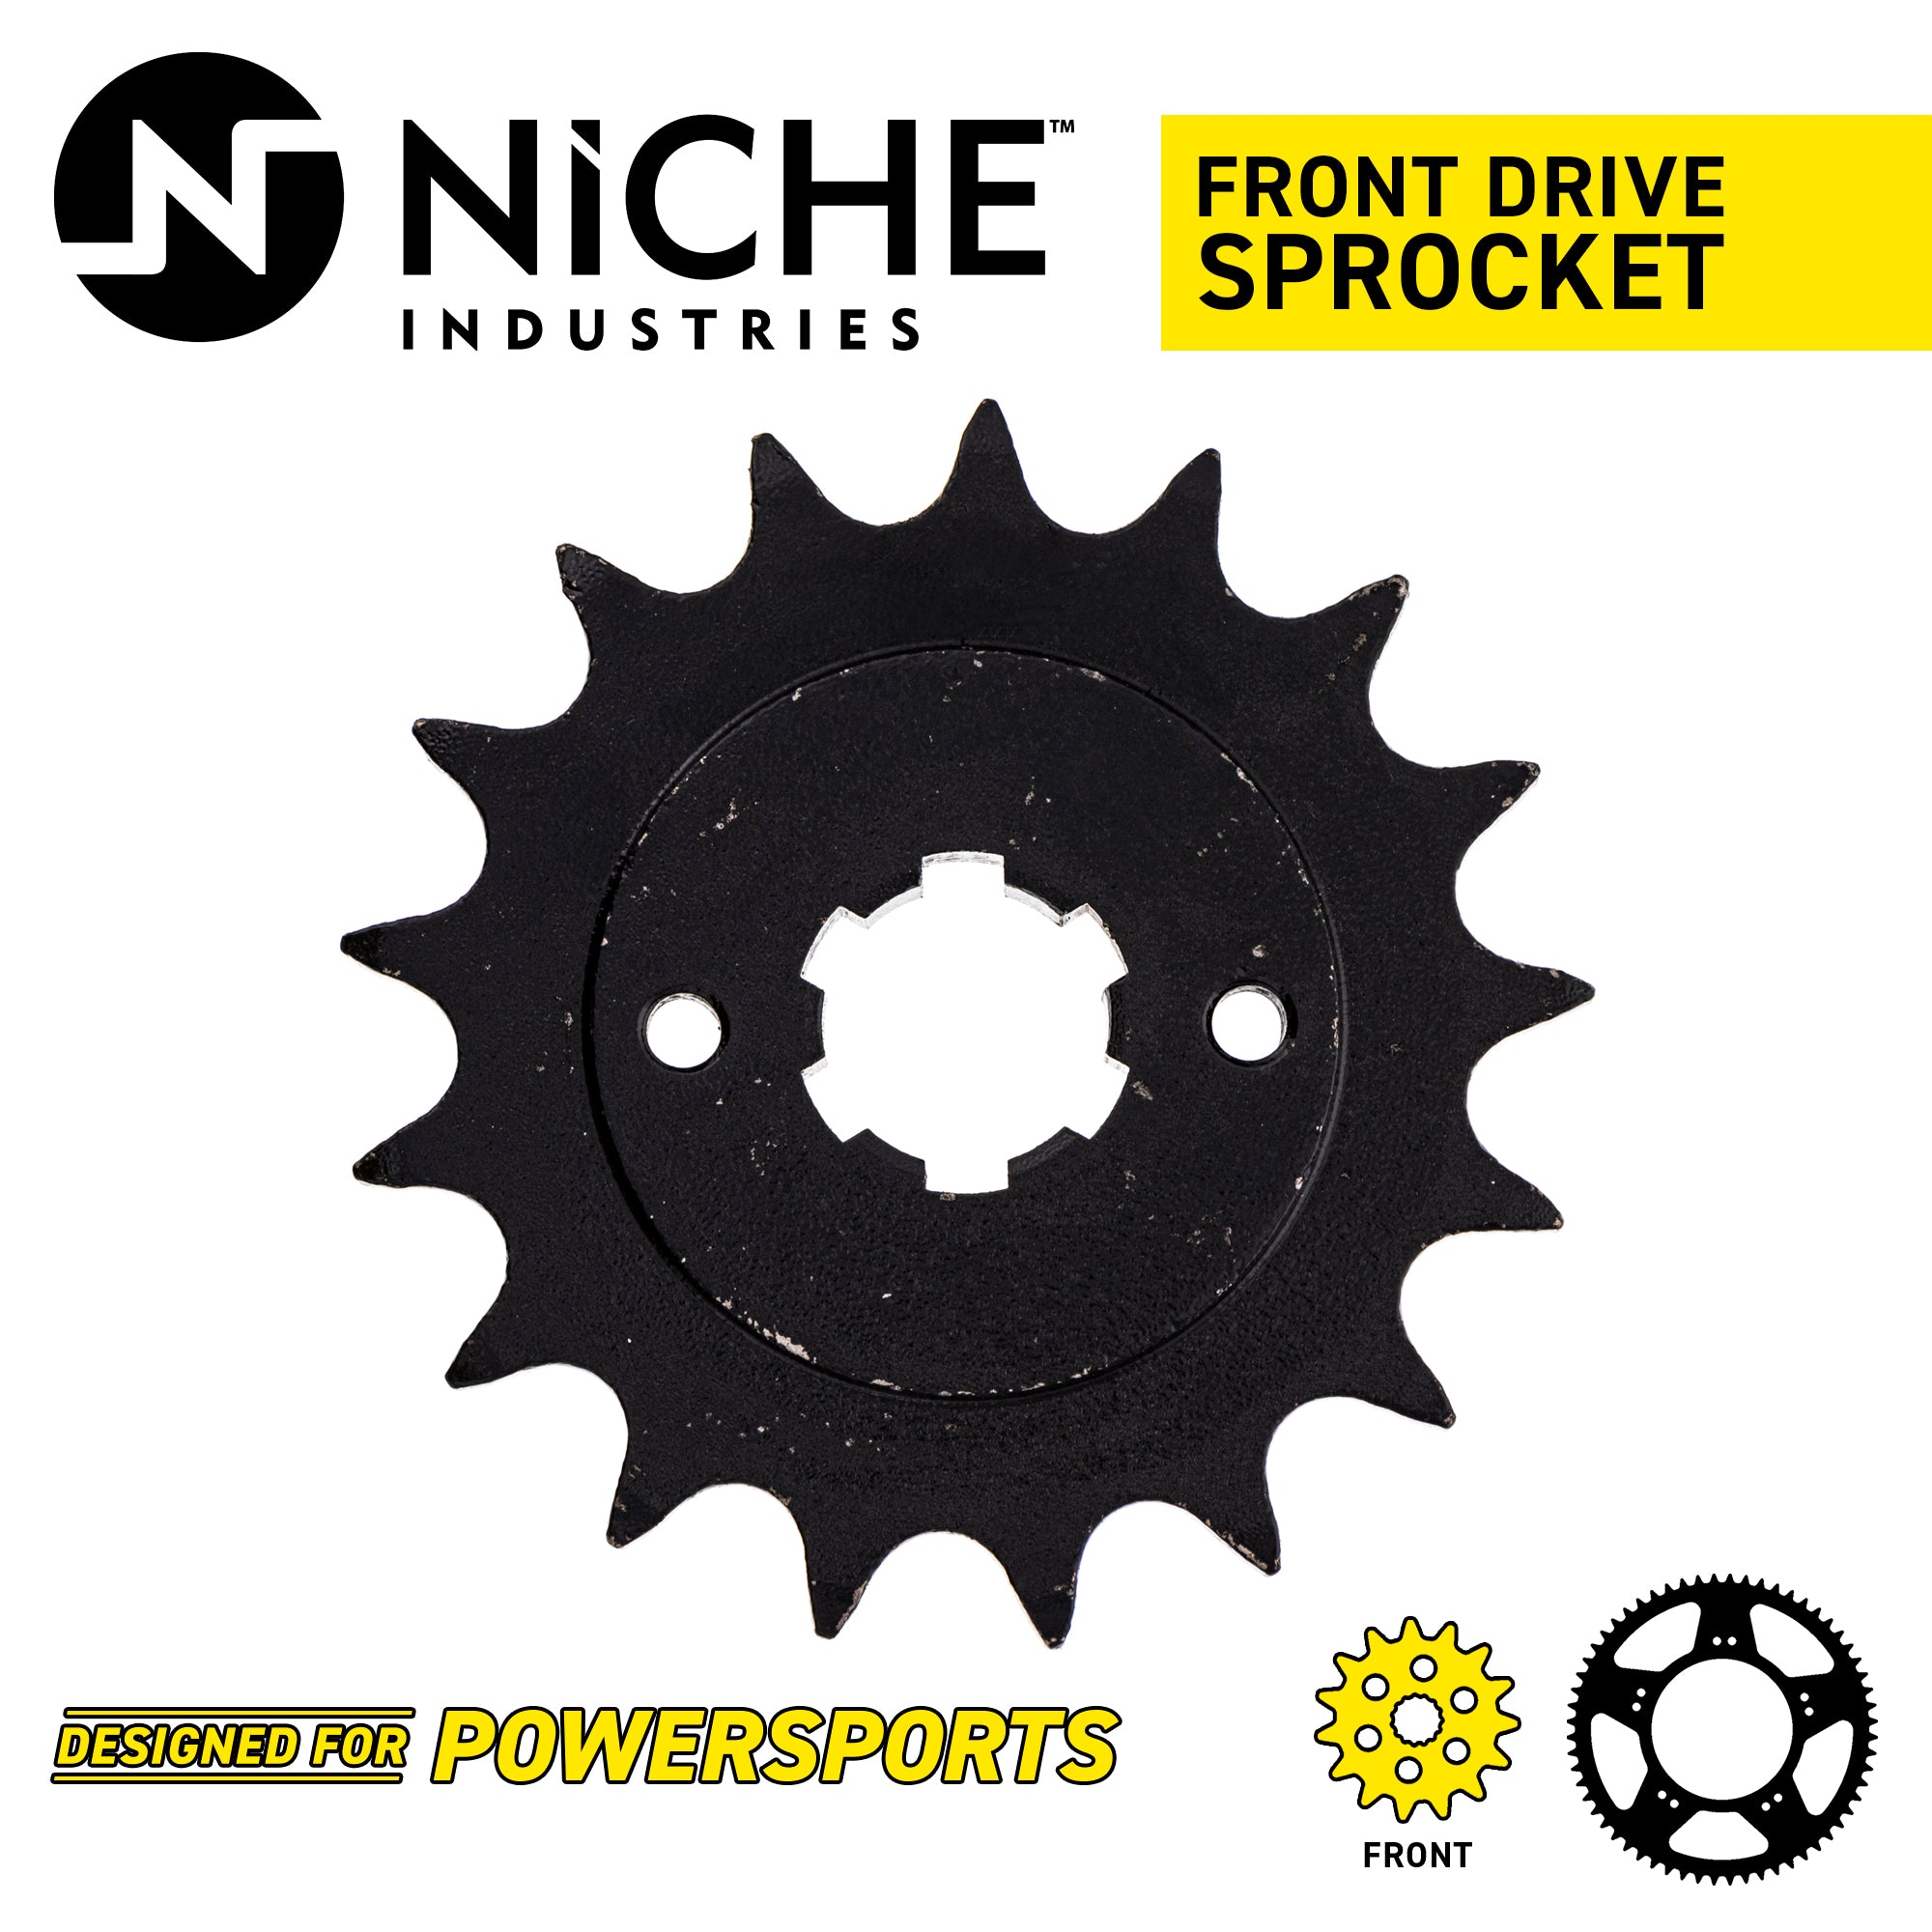 NICHE 519-CDS2379P Tooth Front Drive Sprocket for zOTHER JT Sprocket